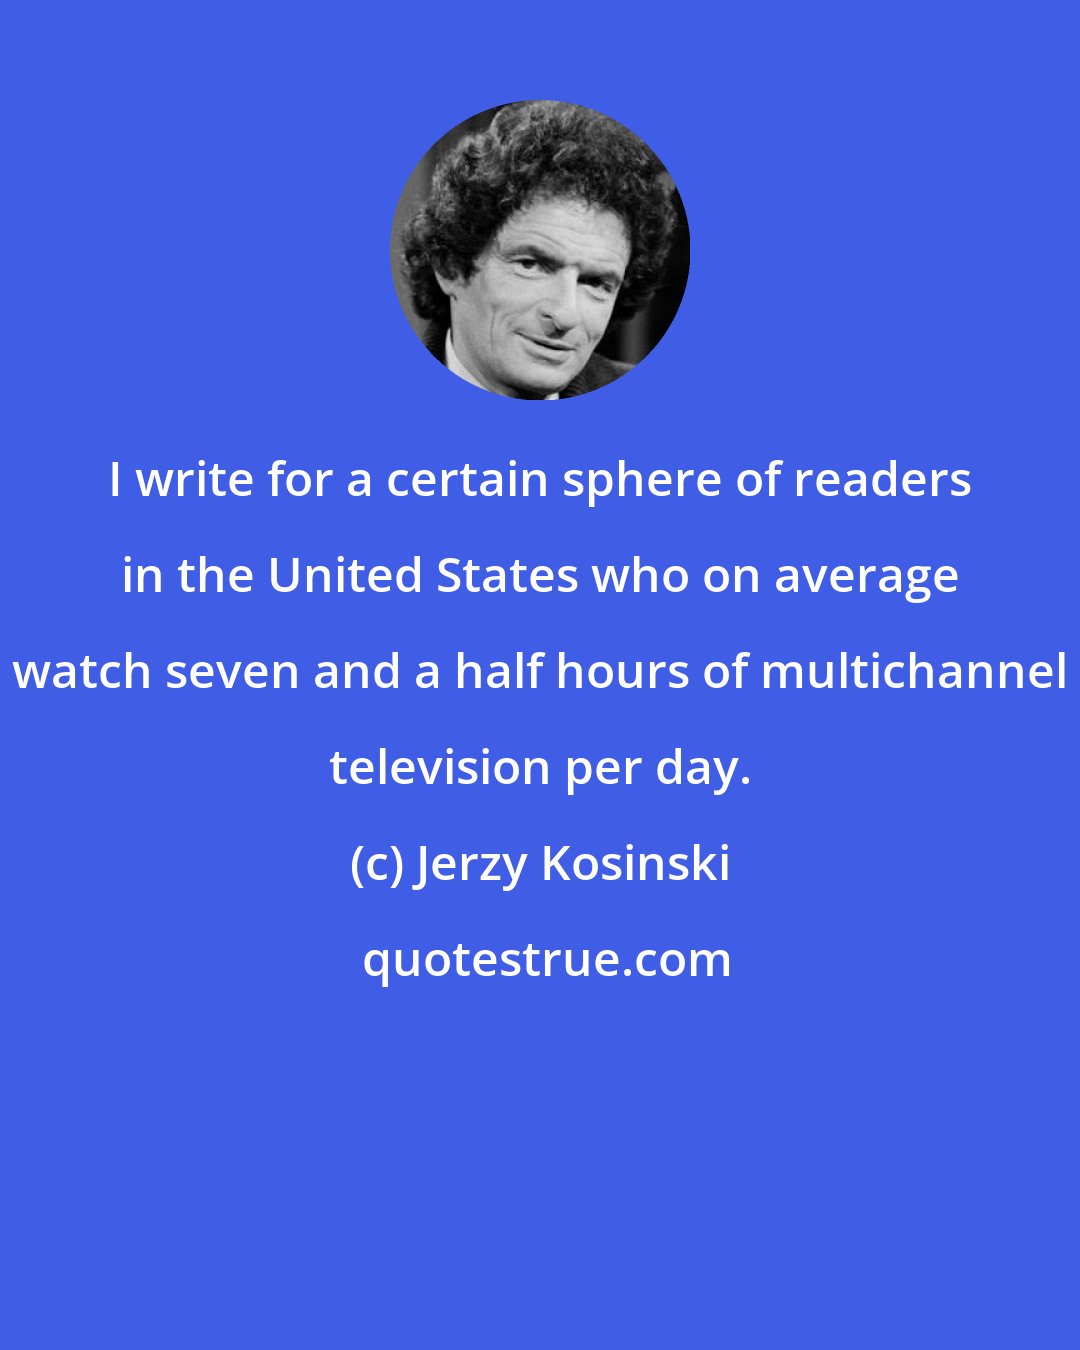 Jerzy Kosinski: I write for a certain sphere of readers in the United States who on average watch seven and a half hours of multichannel television per day.